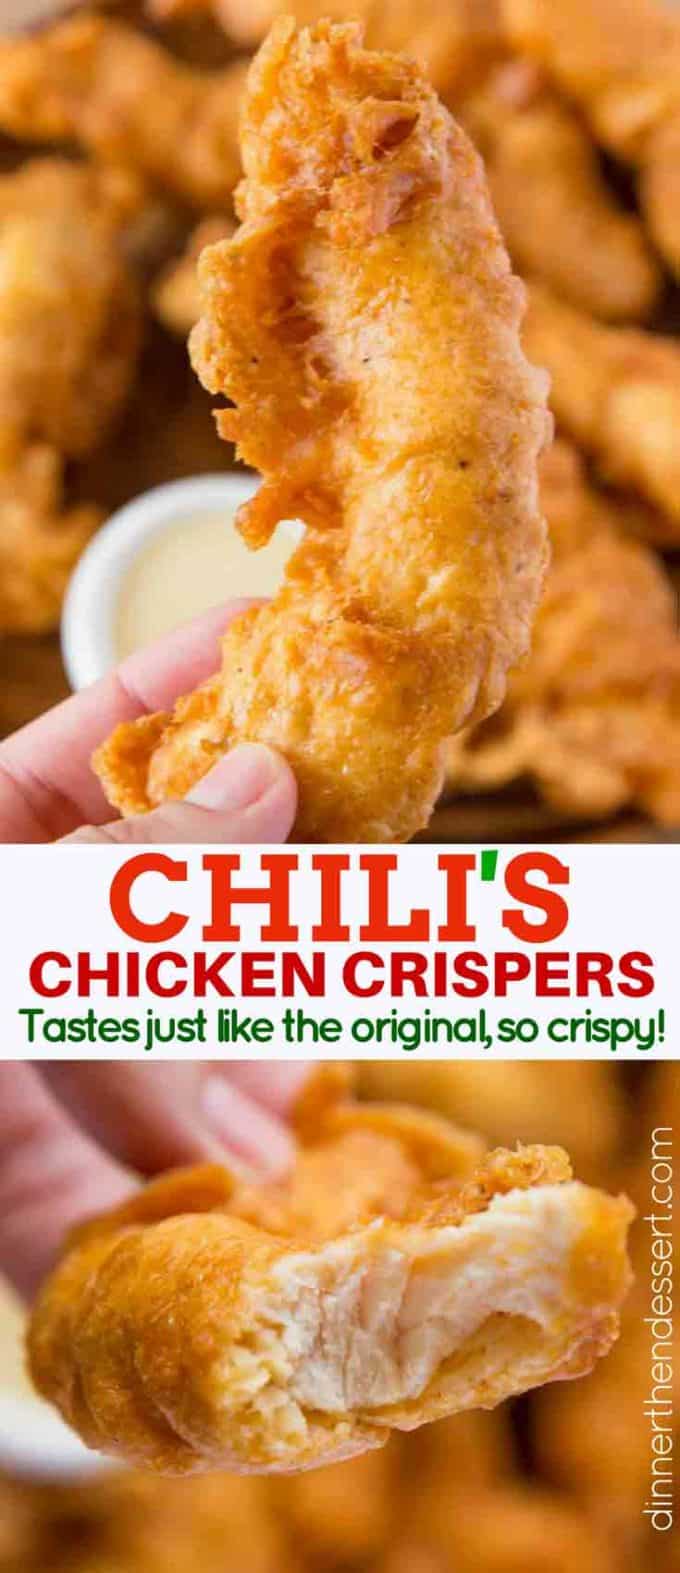 Chicken Tenders from Chili's